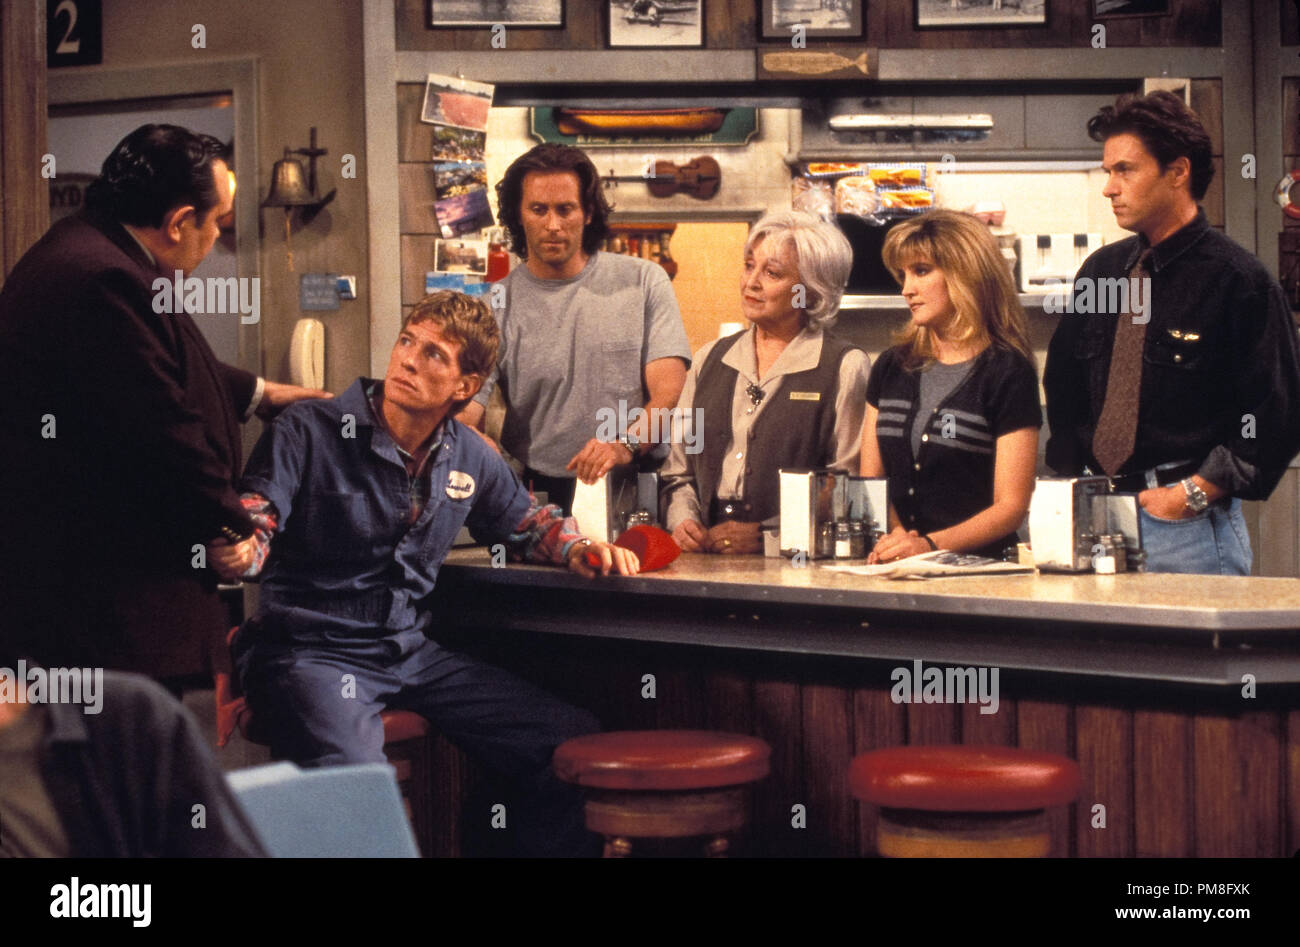 Film still / publicity still from "Wings" David Schramm, Thomas Haden Church,  Steven Weber, Rebecca Schull, Crystal Bernard, Tim Daly 1993 File Reference  # 31371021THA For Editorial Use Only All Rights Reserved